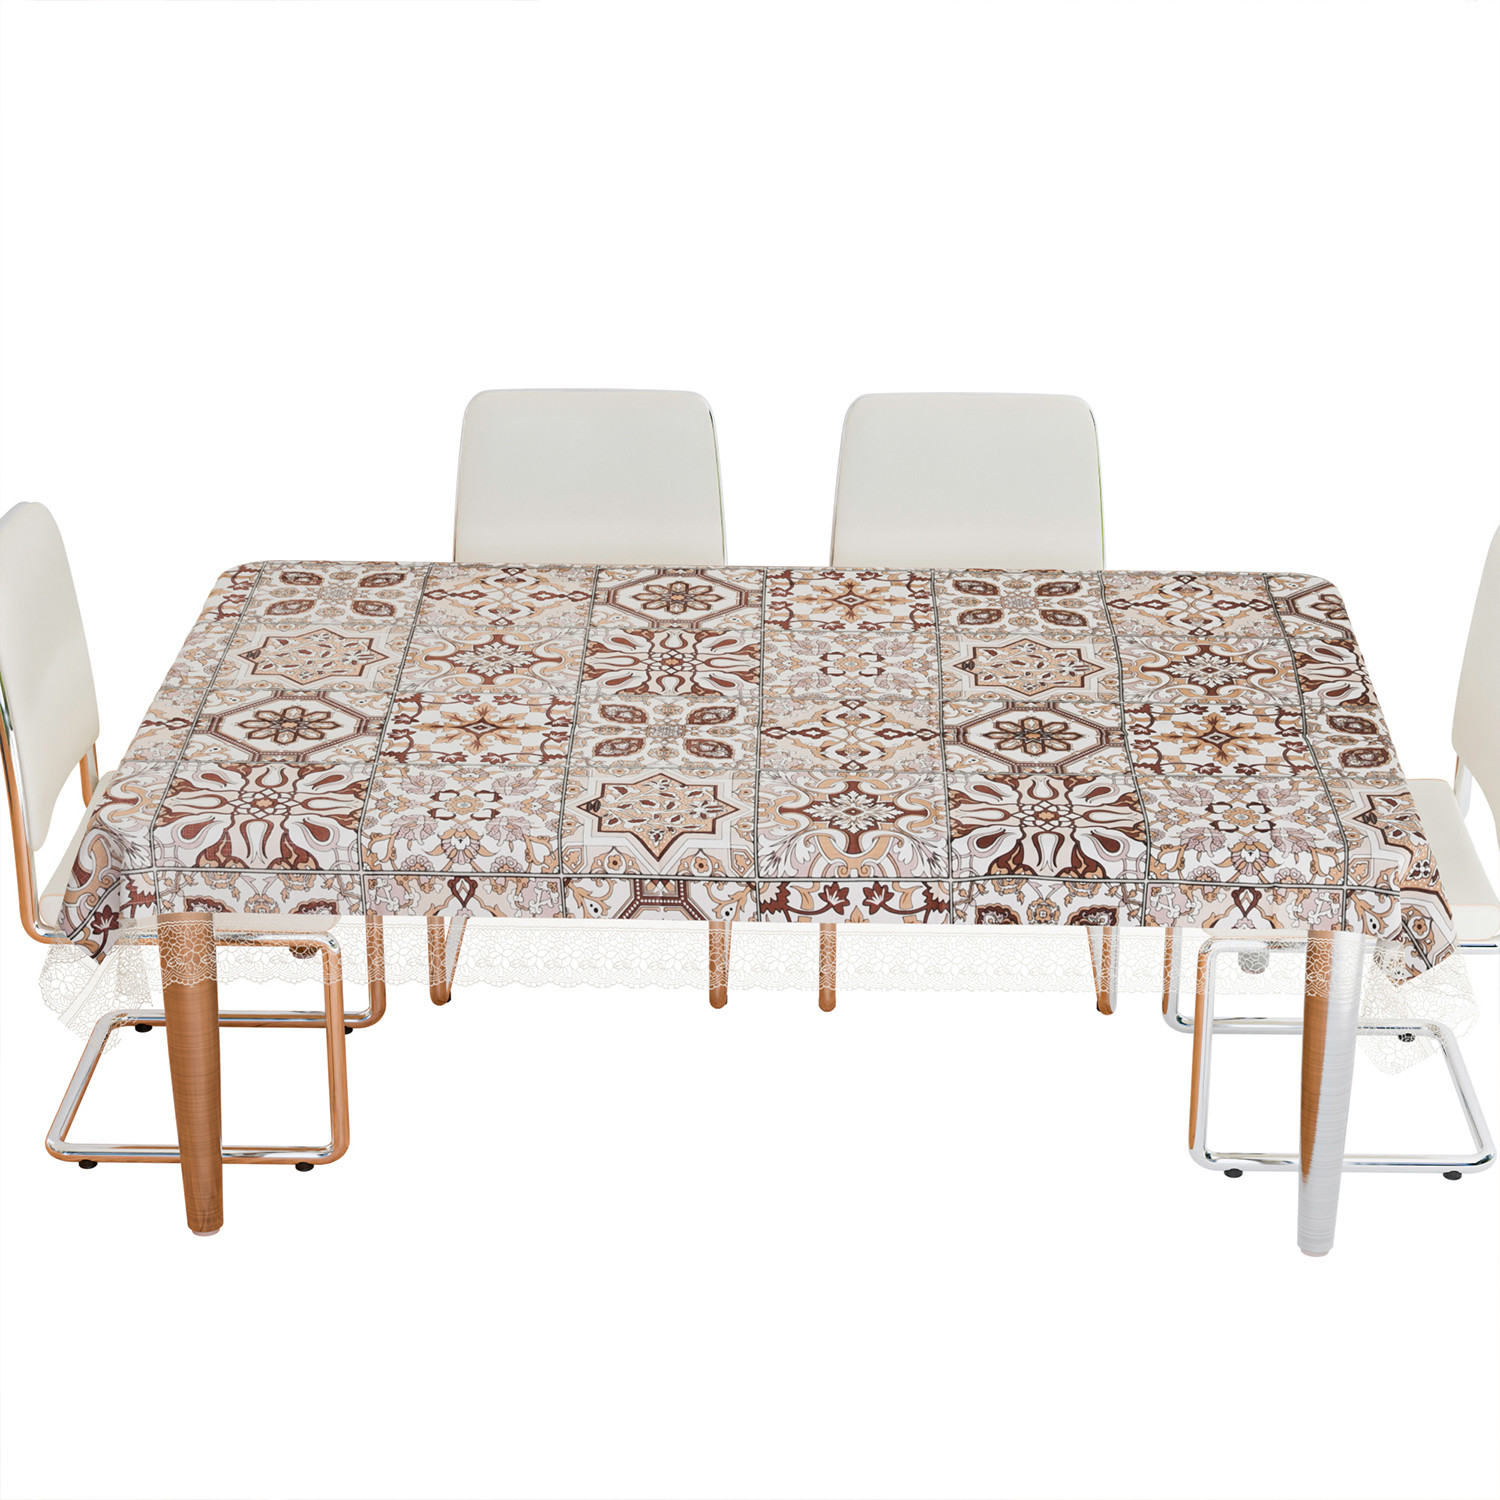 Kuber Industries Dining Table Cover | PVC Table Cover | Reusable Cloth Cover for Table Top | Star Design Dining Table Cover | Table Protector Cover | 60x90 Inch | Brown